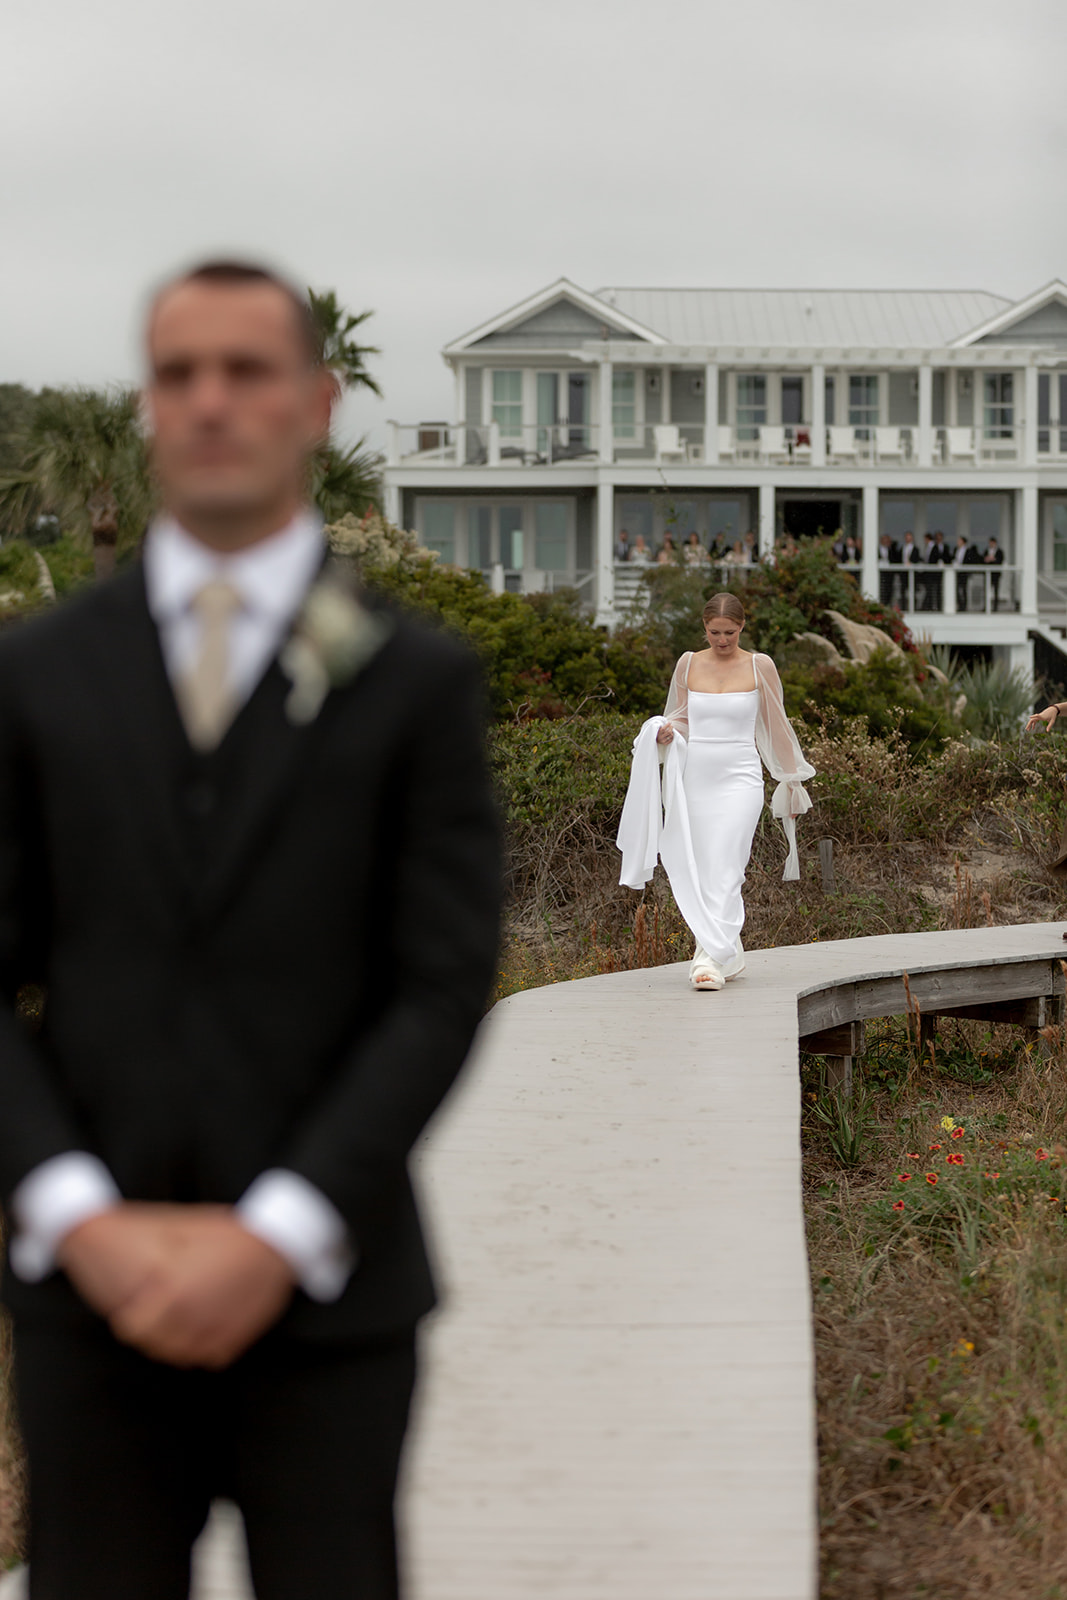 Before the first look. Bride in the background and in focus walking along wooden boardwalk towards groom. He stands in the foreground and out of focus with his back turned to the bride.